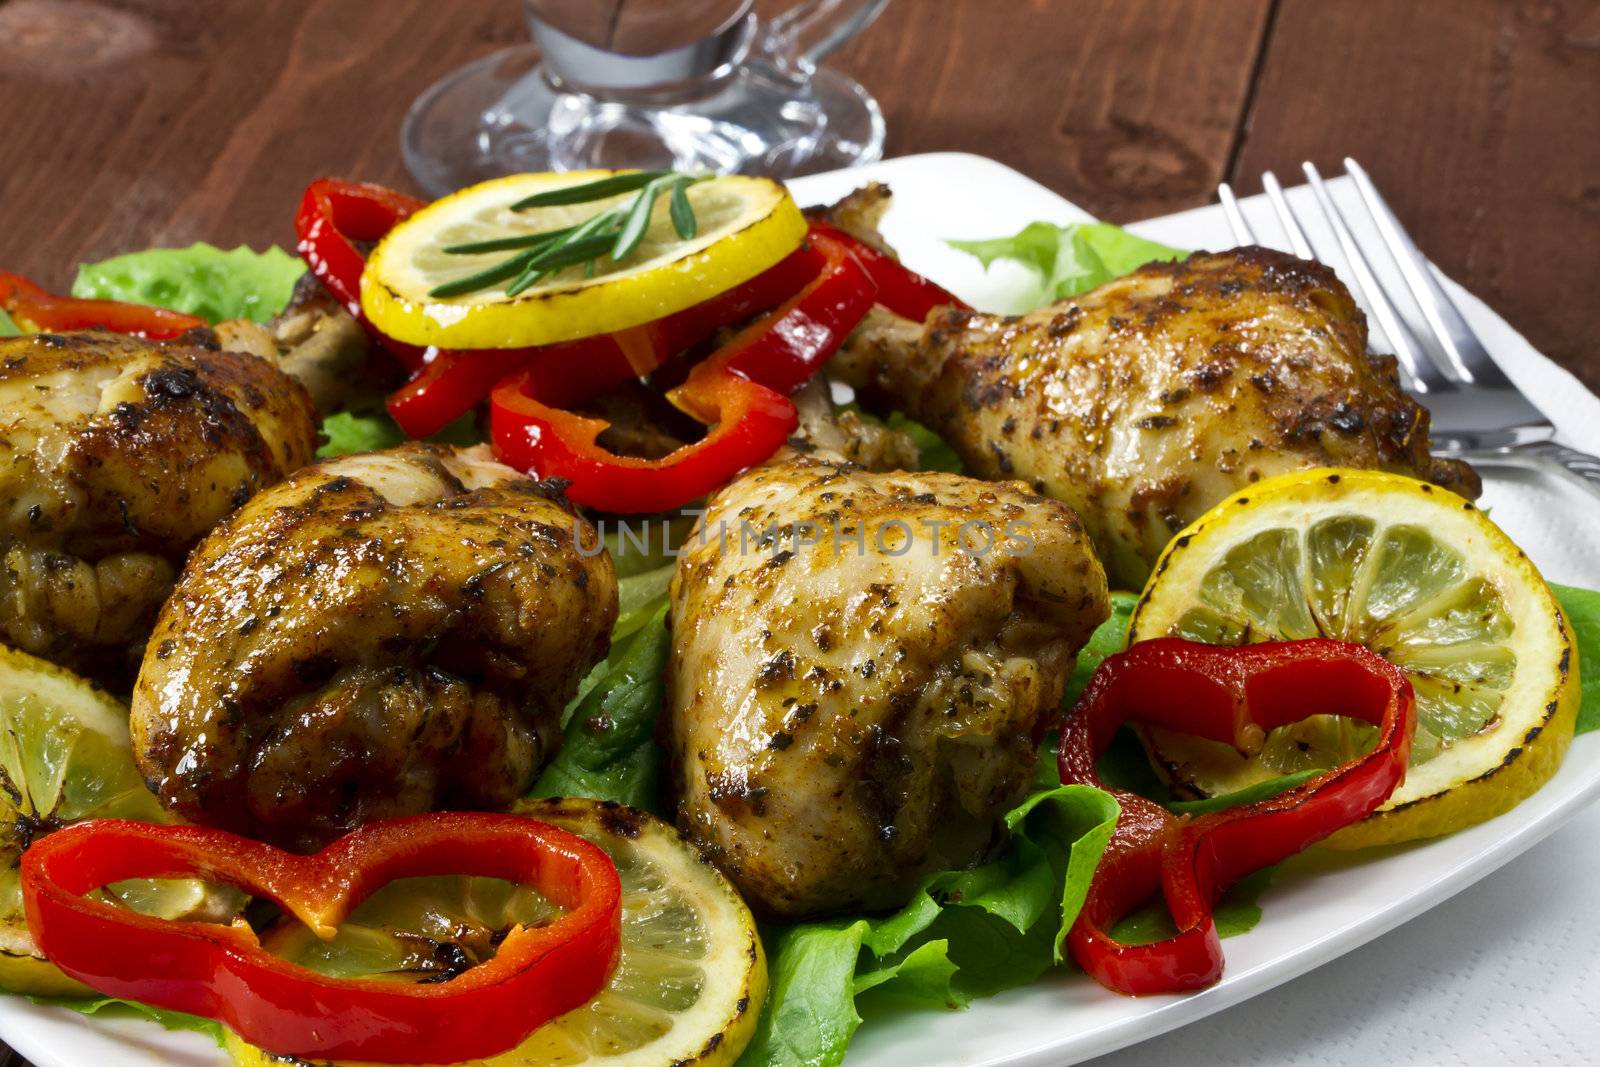 Fried chicken drumsticks with lemon and red peppers